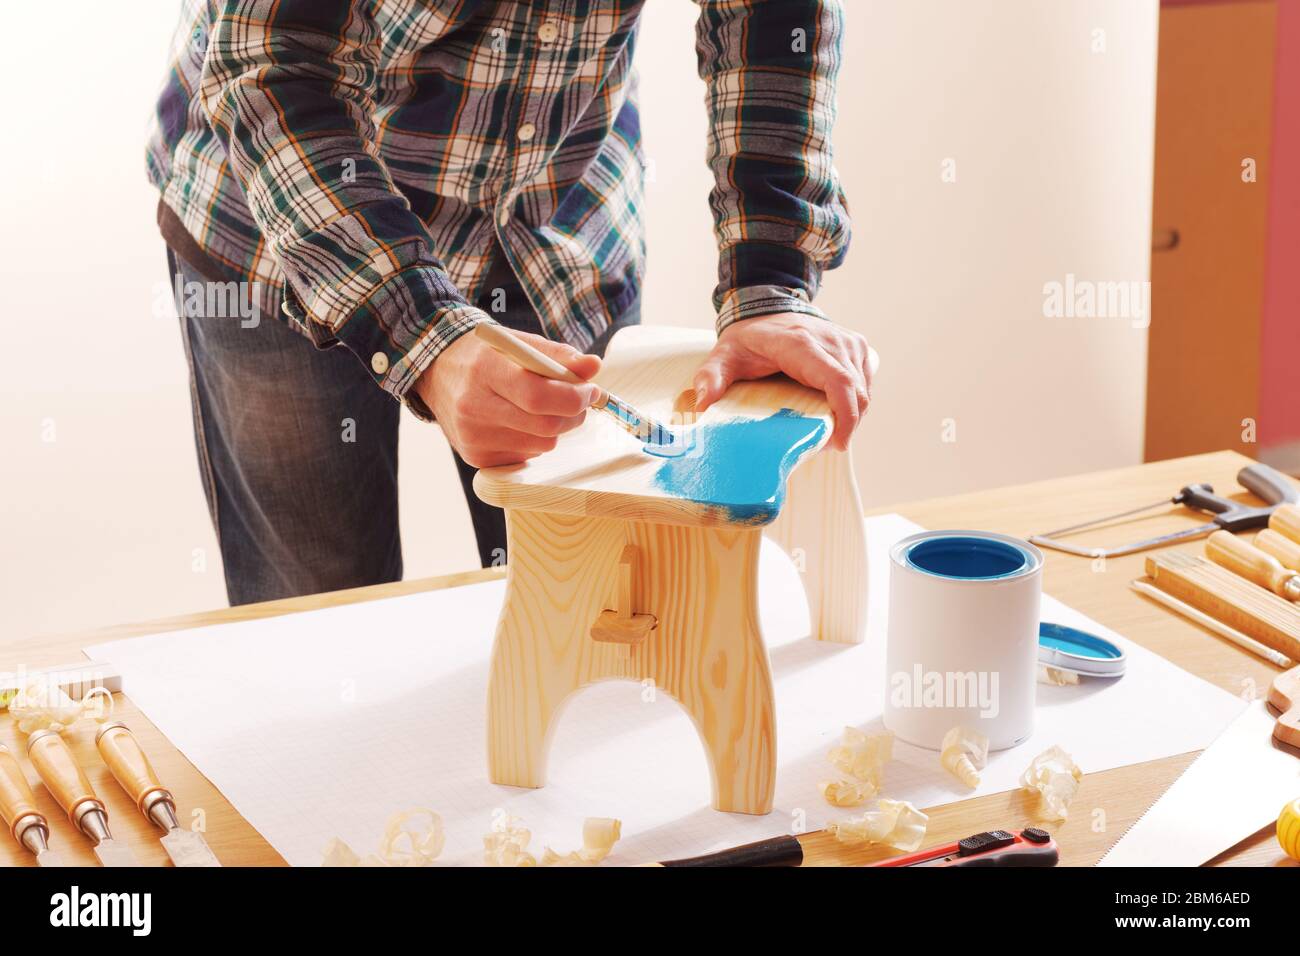 Craftsman varnishing a wooden handmade stool at home with a blue coating on a work table Stock Photo